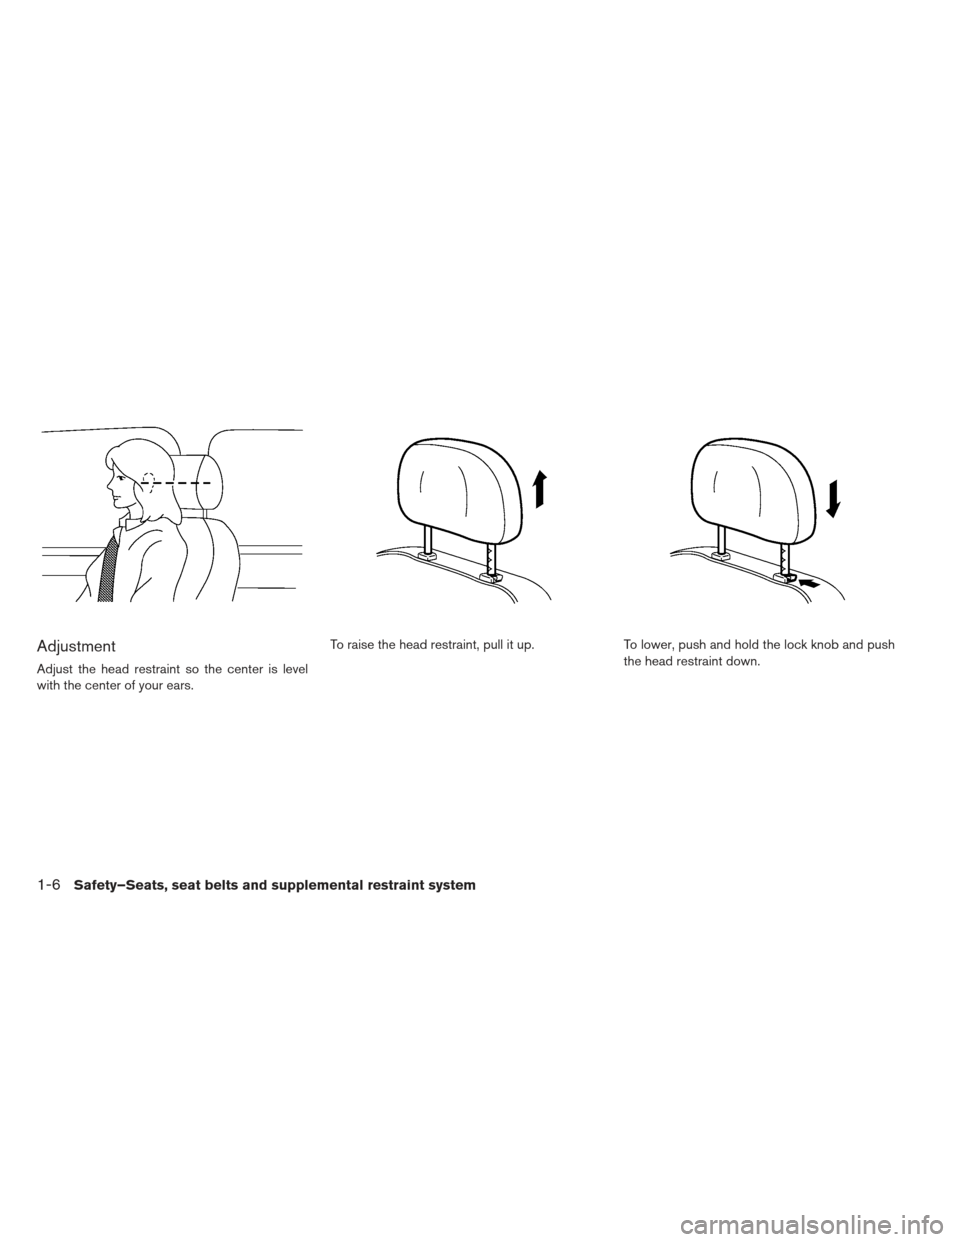 NISSAN LEAF 2013 1.G Owners Manual Adjustment
Adjust the head restraint so the center is level
with the center of your ears.To raise the head restraint, pull it up.
To lower, push and hold the lock knob and push
the head restraint down